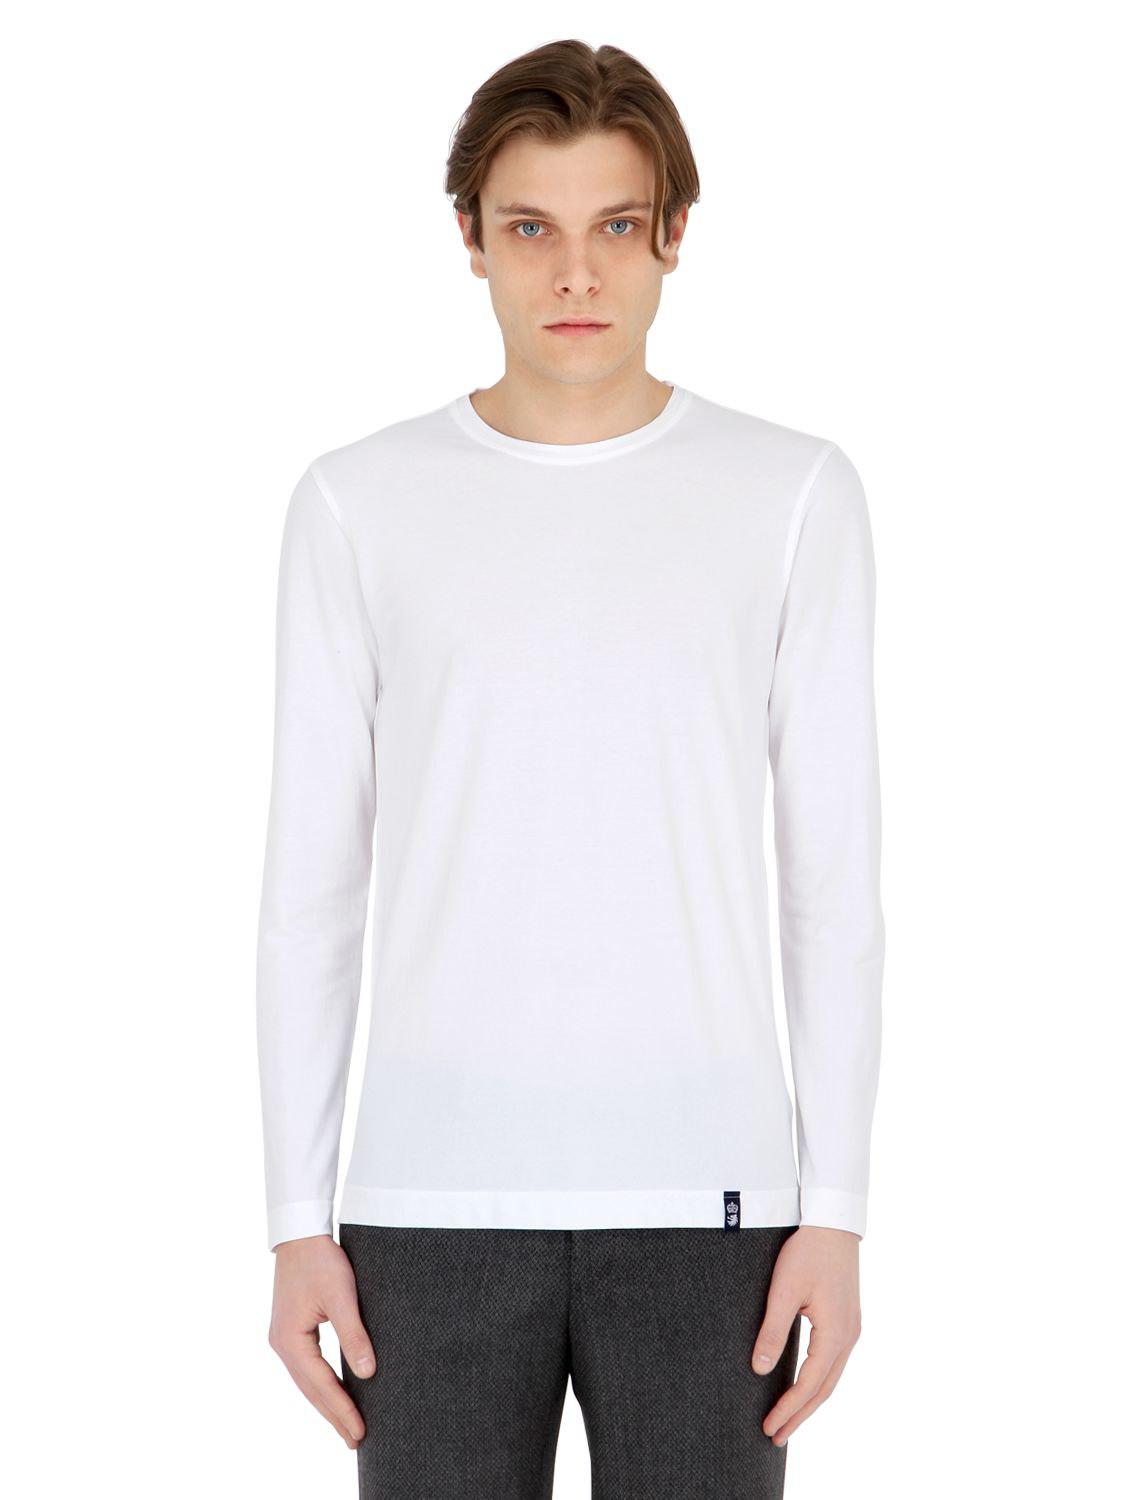 Download Lyst - Drumohr Cotton Crepe Jersey Long Sleeve T-shirt in ...